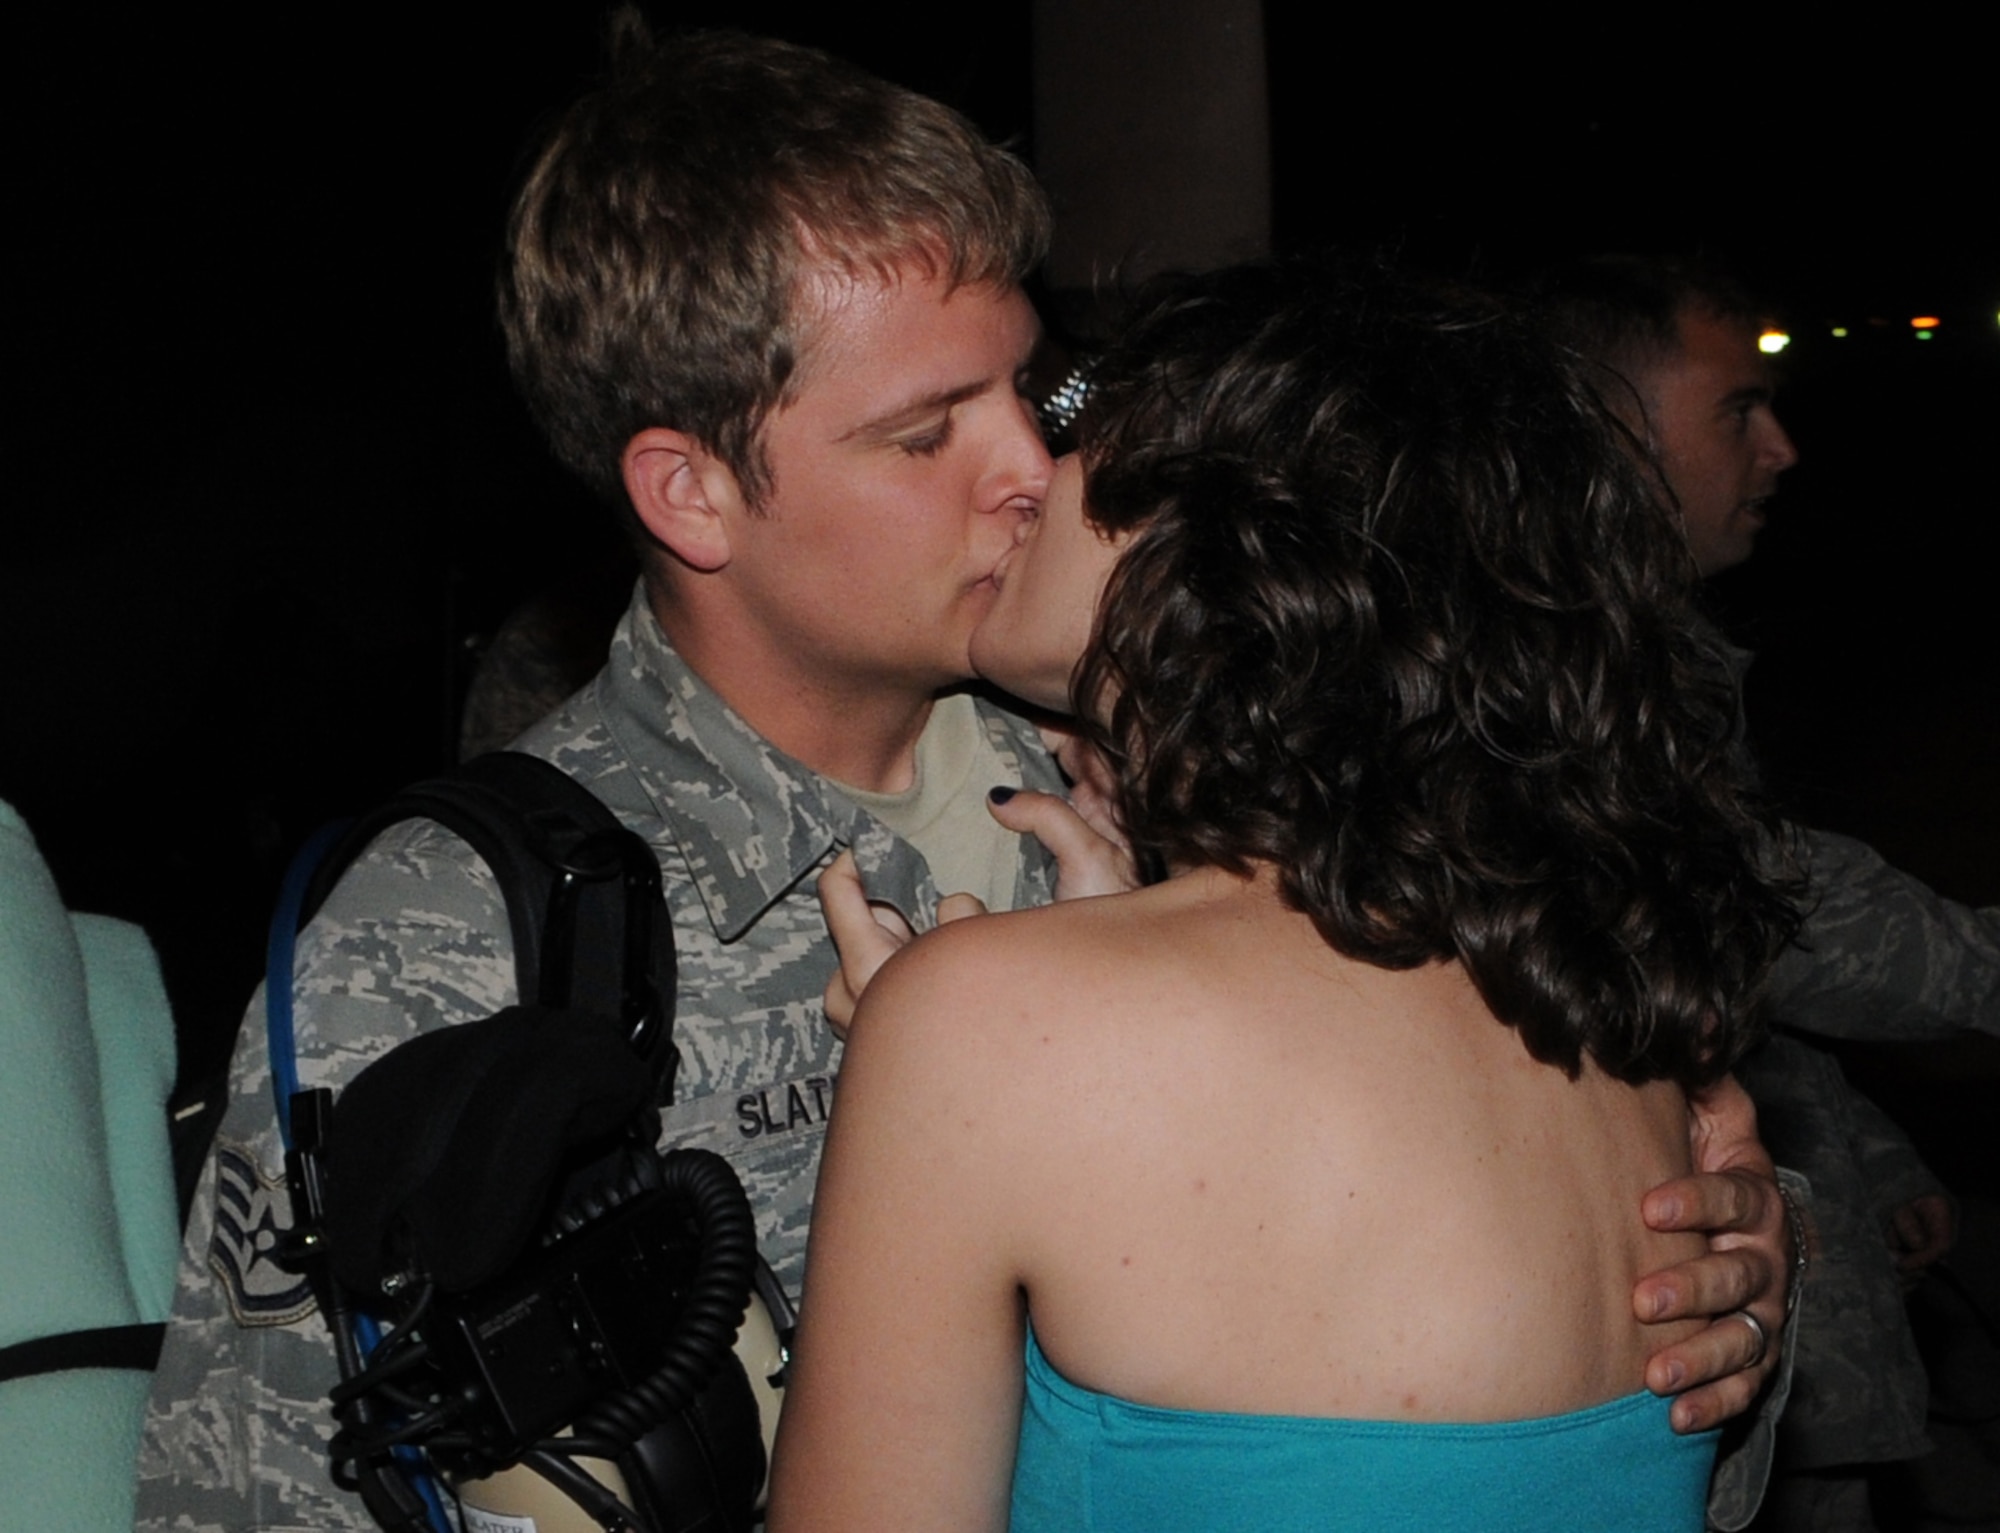 KADENA AIR BASE, Japan -- Staff Sgt. Cory Slater, from the 353rd Maintenance Squadron, kisses his wife Anda at a welcome home ceremony here April 25 after returning from a four-month deployment supporting combat operations in Afghanistan. (U.S. Air Force photo by Tech. Sgt. Aaron Cram)